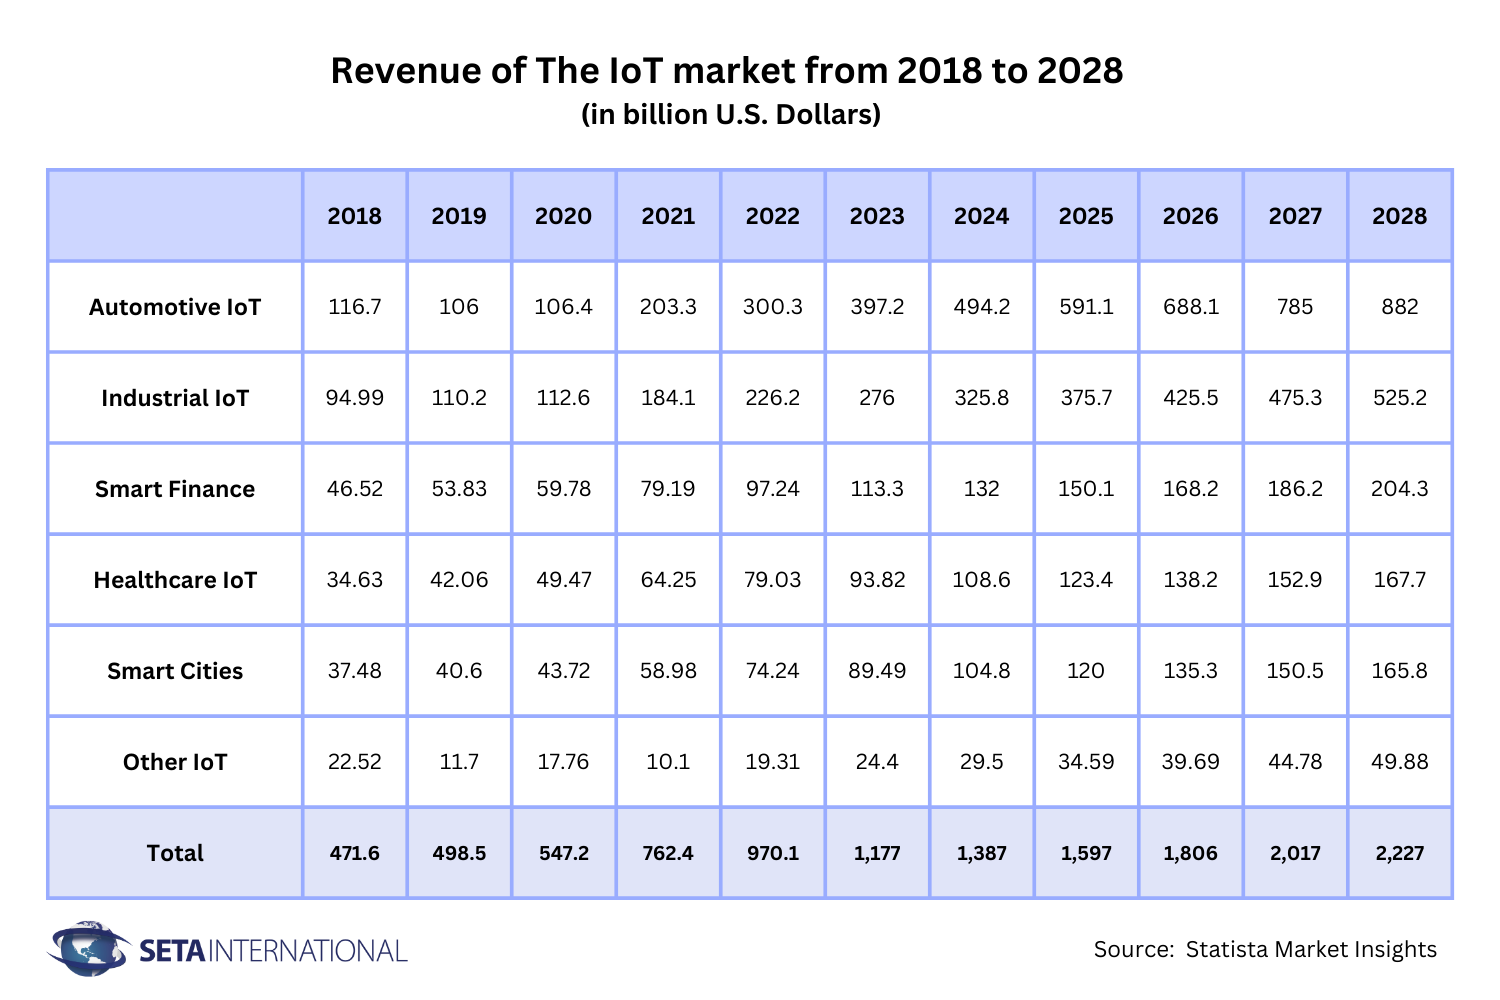 Revenue of The IoT market from 2018 to 2028